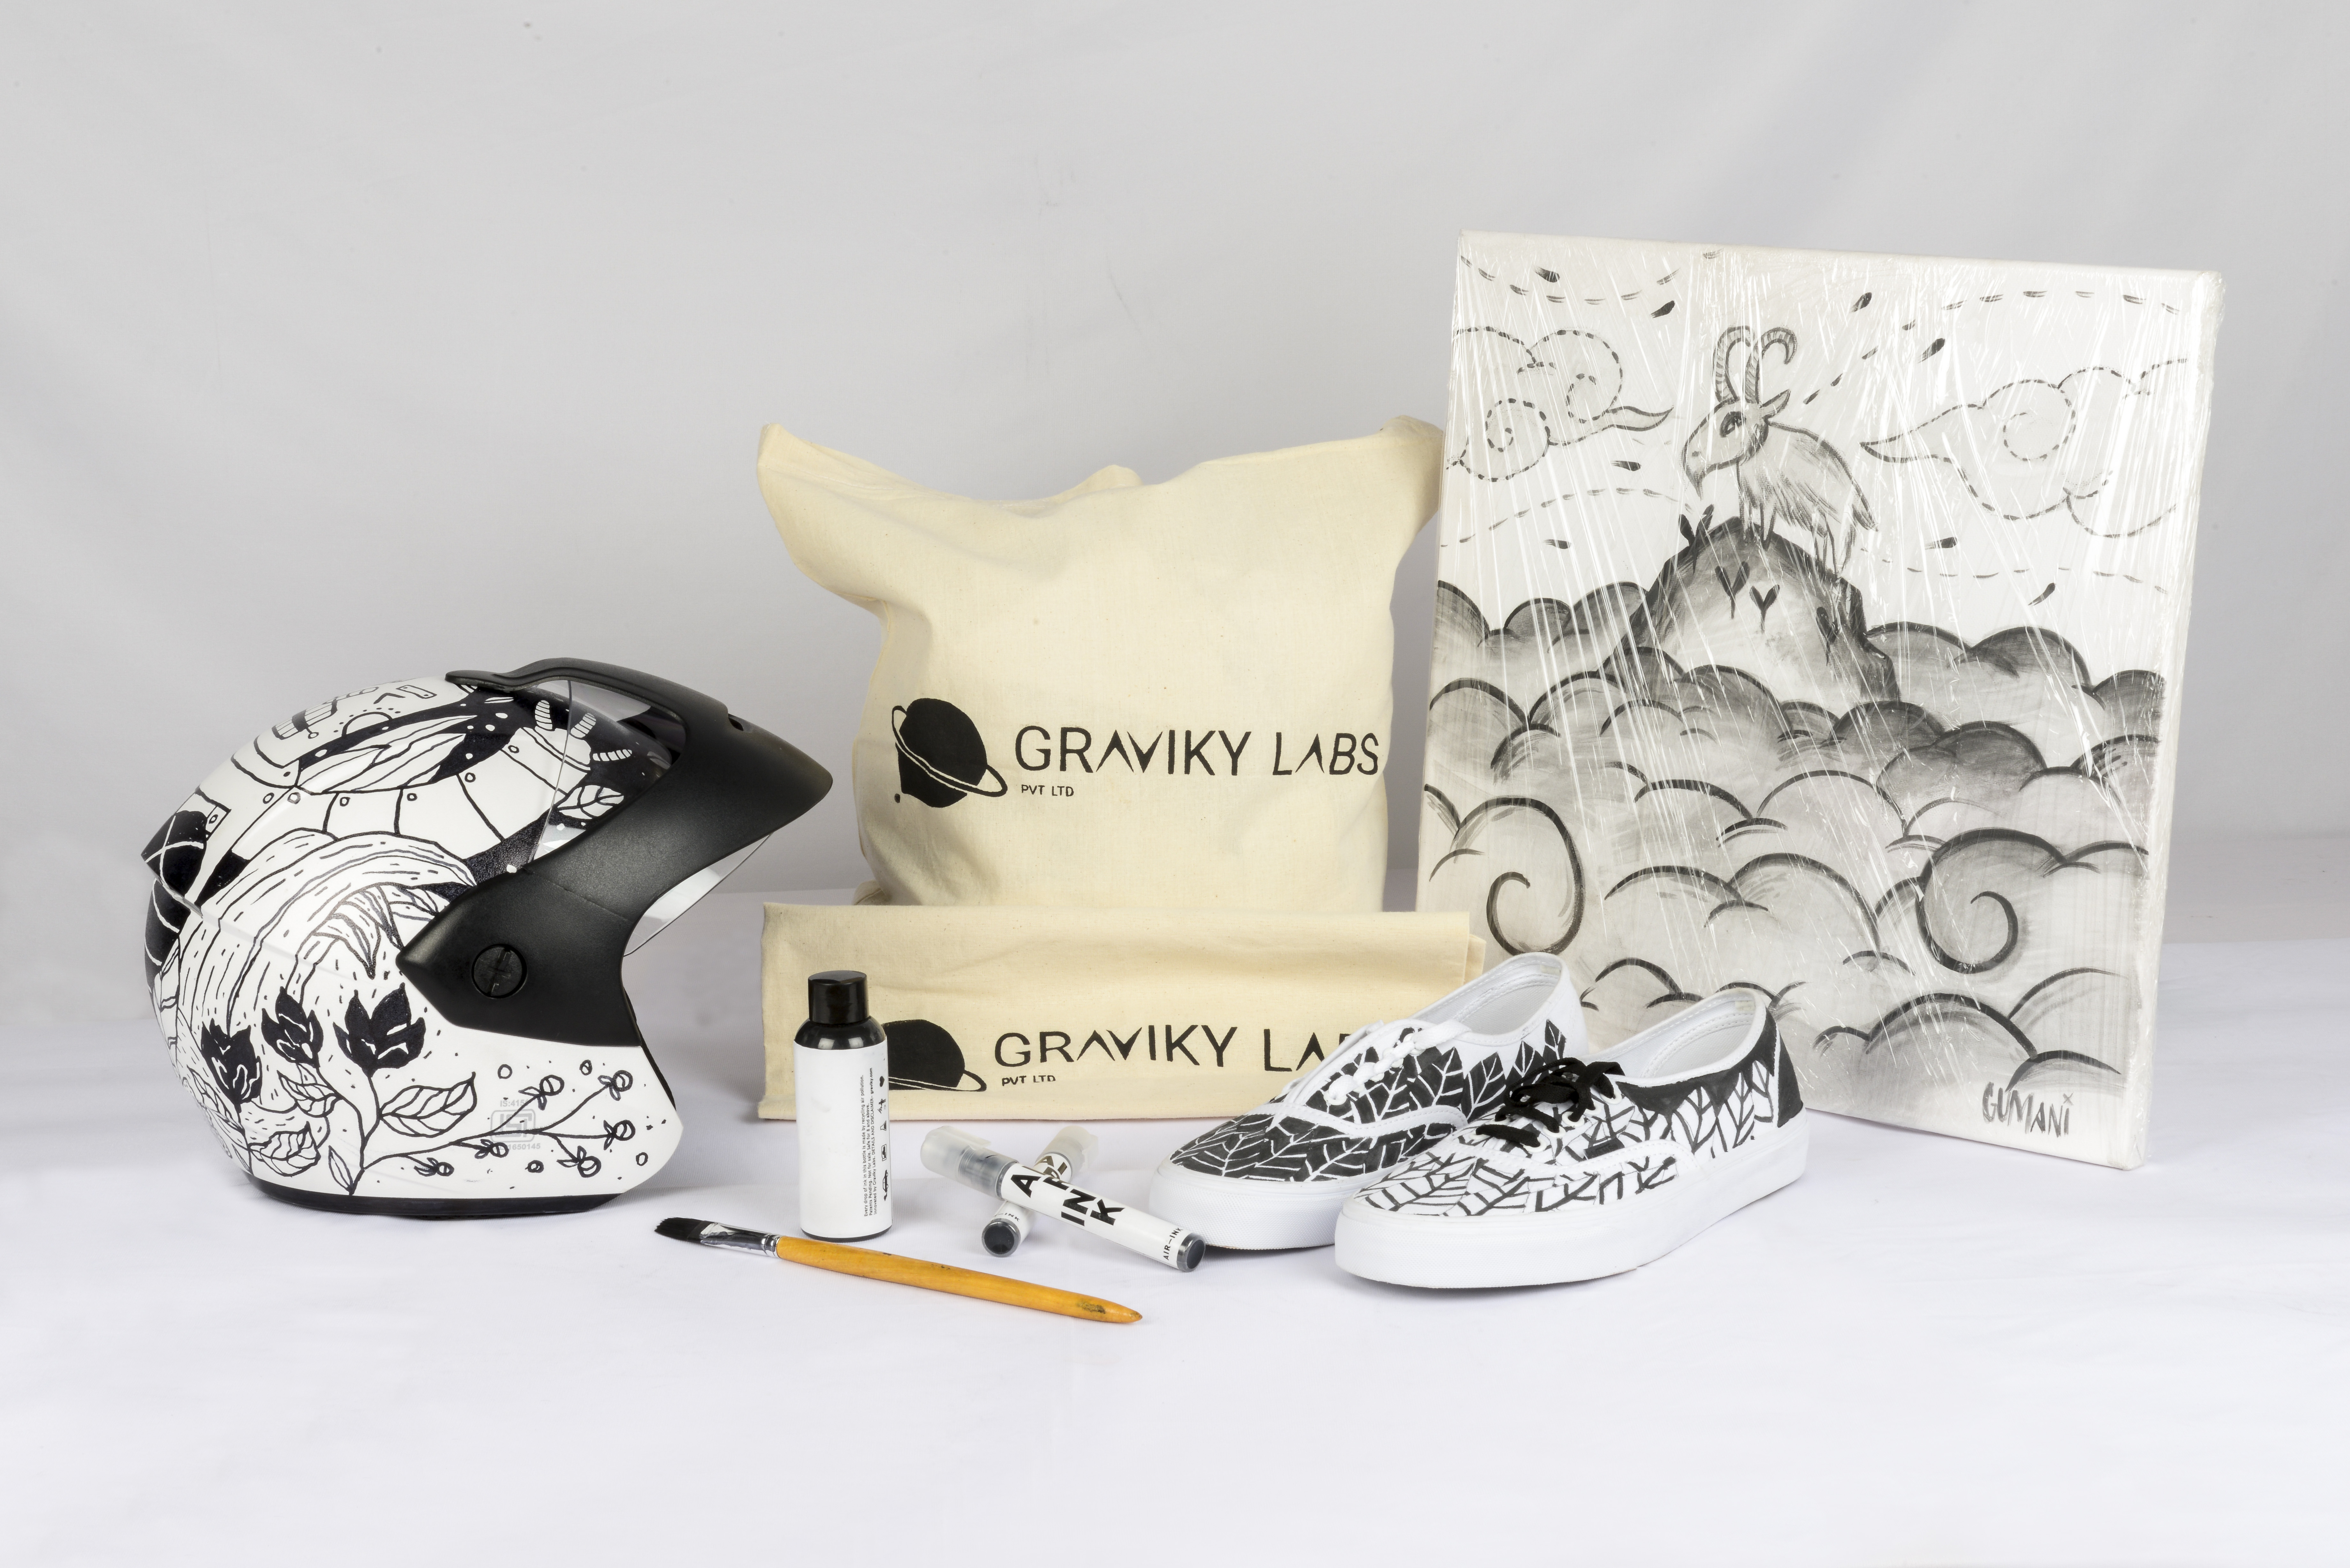 Graviky Labs products